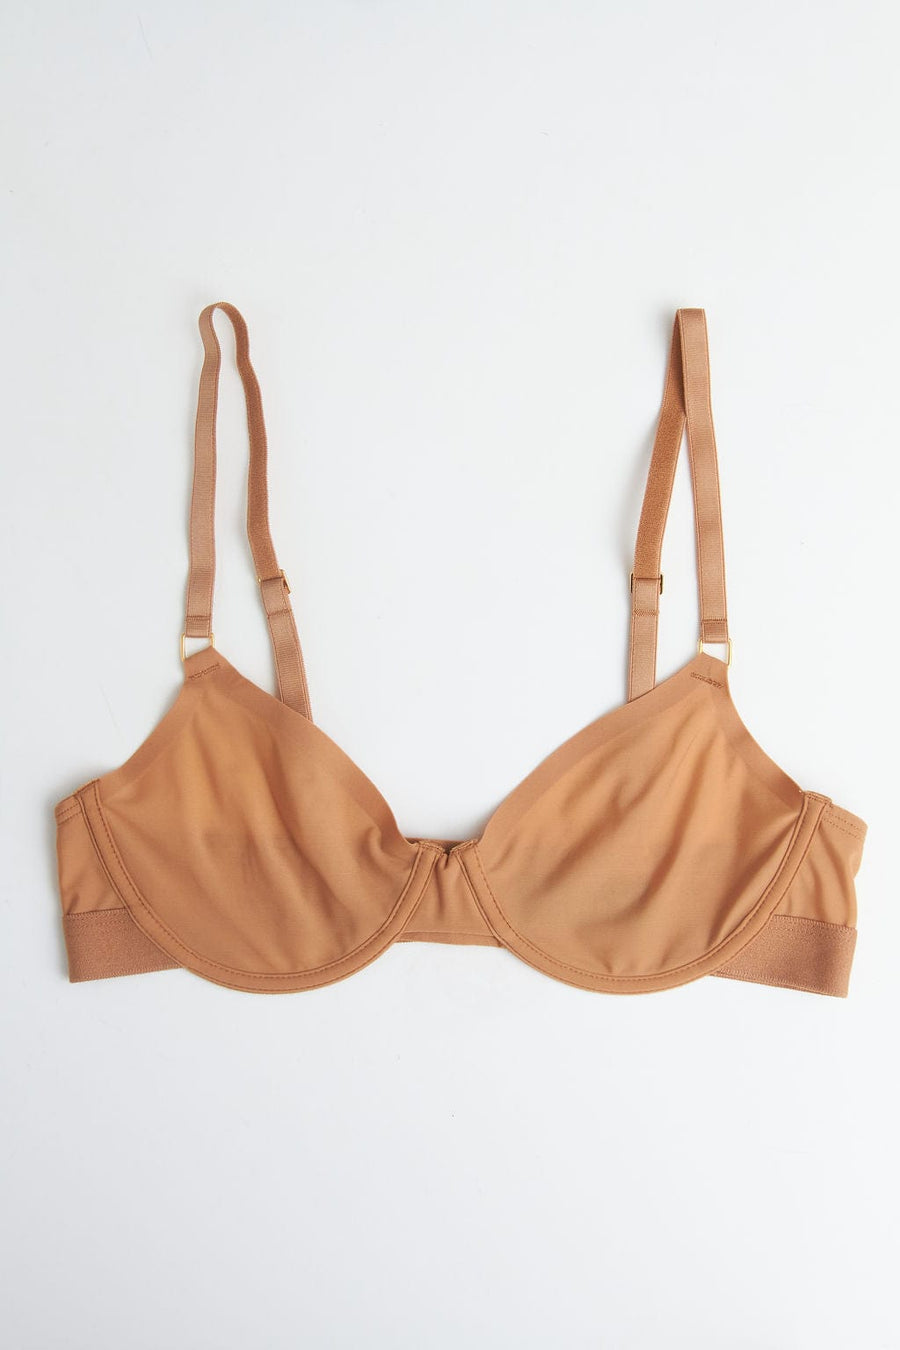 An unlined everyday bra from Bestform is ready for you to try